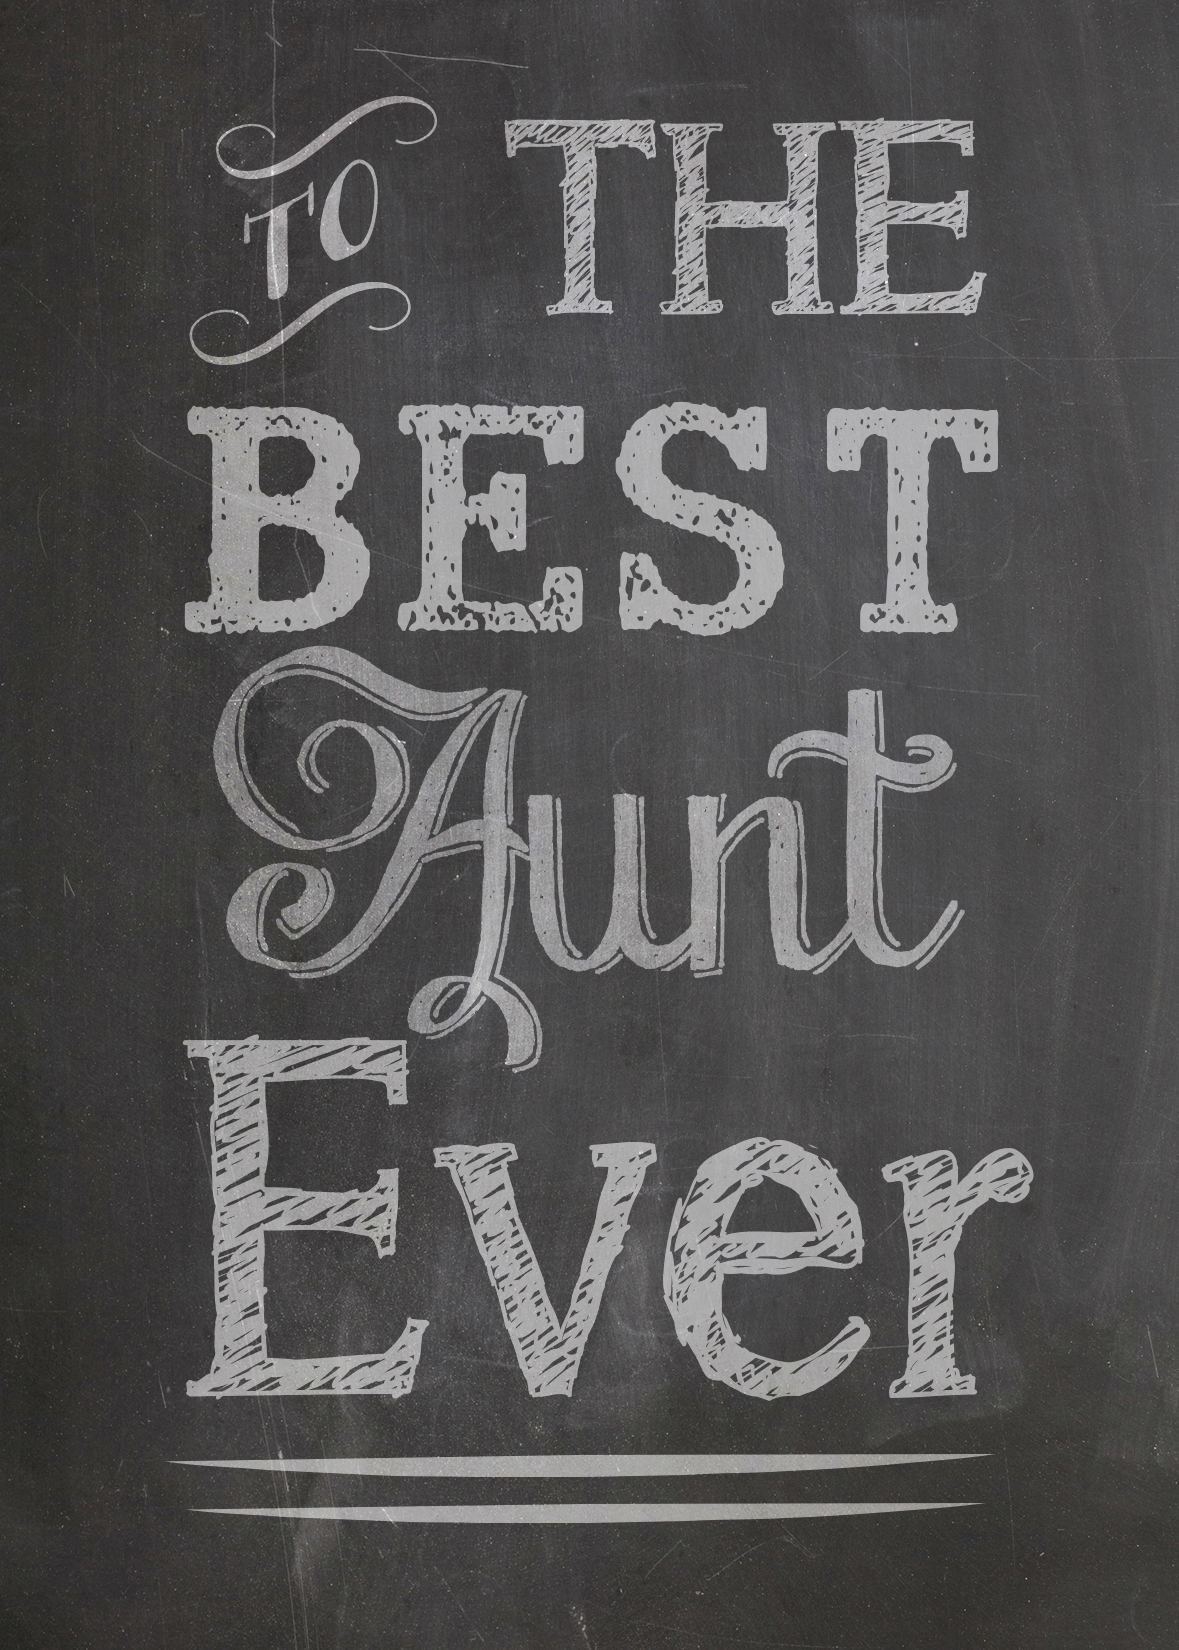 the-25-best-aunt-quotes-ideas-on-pinterest-being-an-aunt-quotes-riset